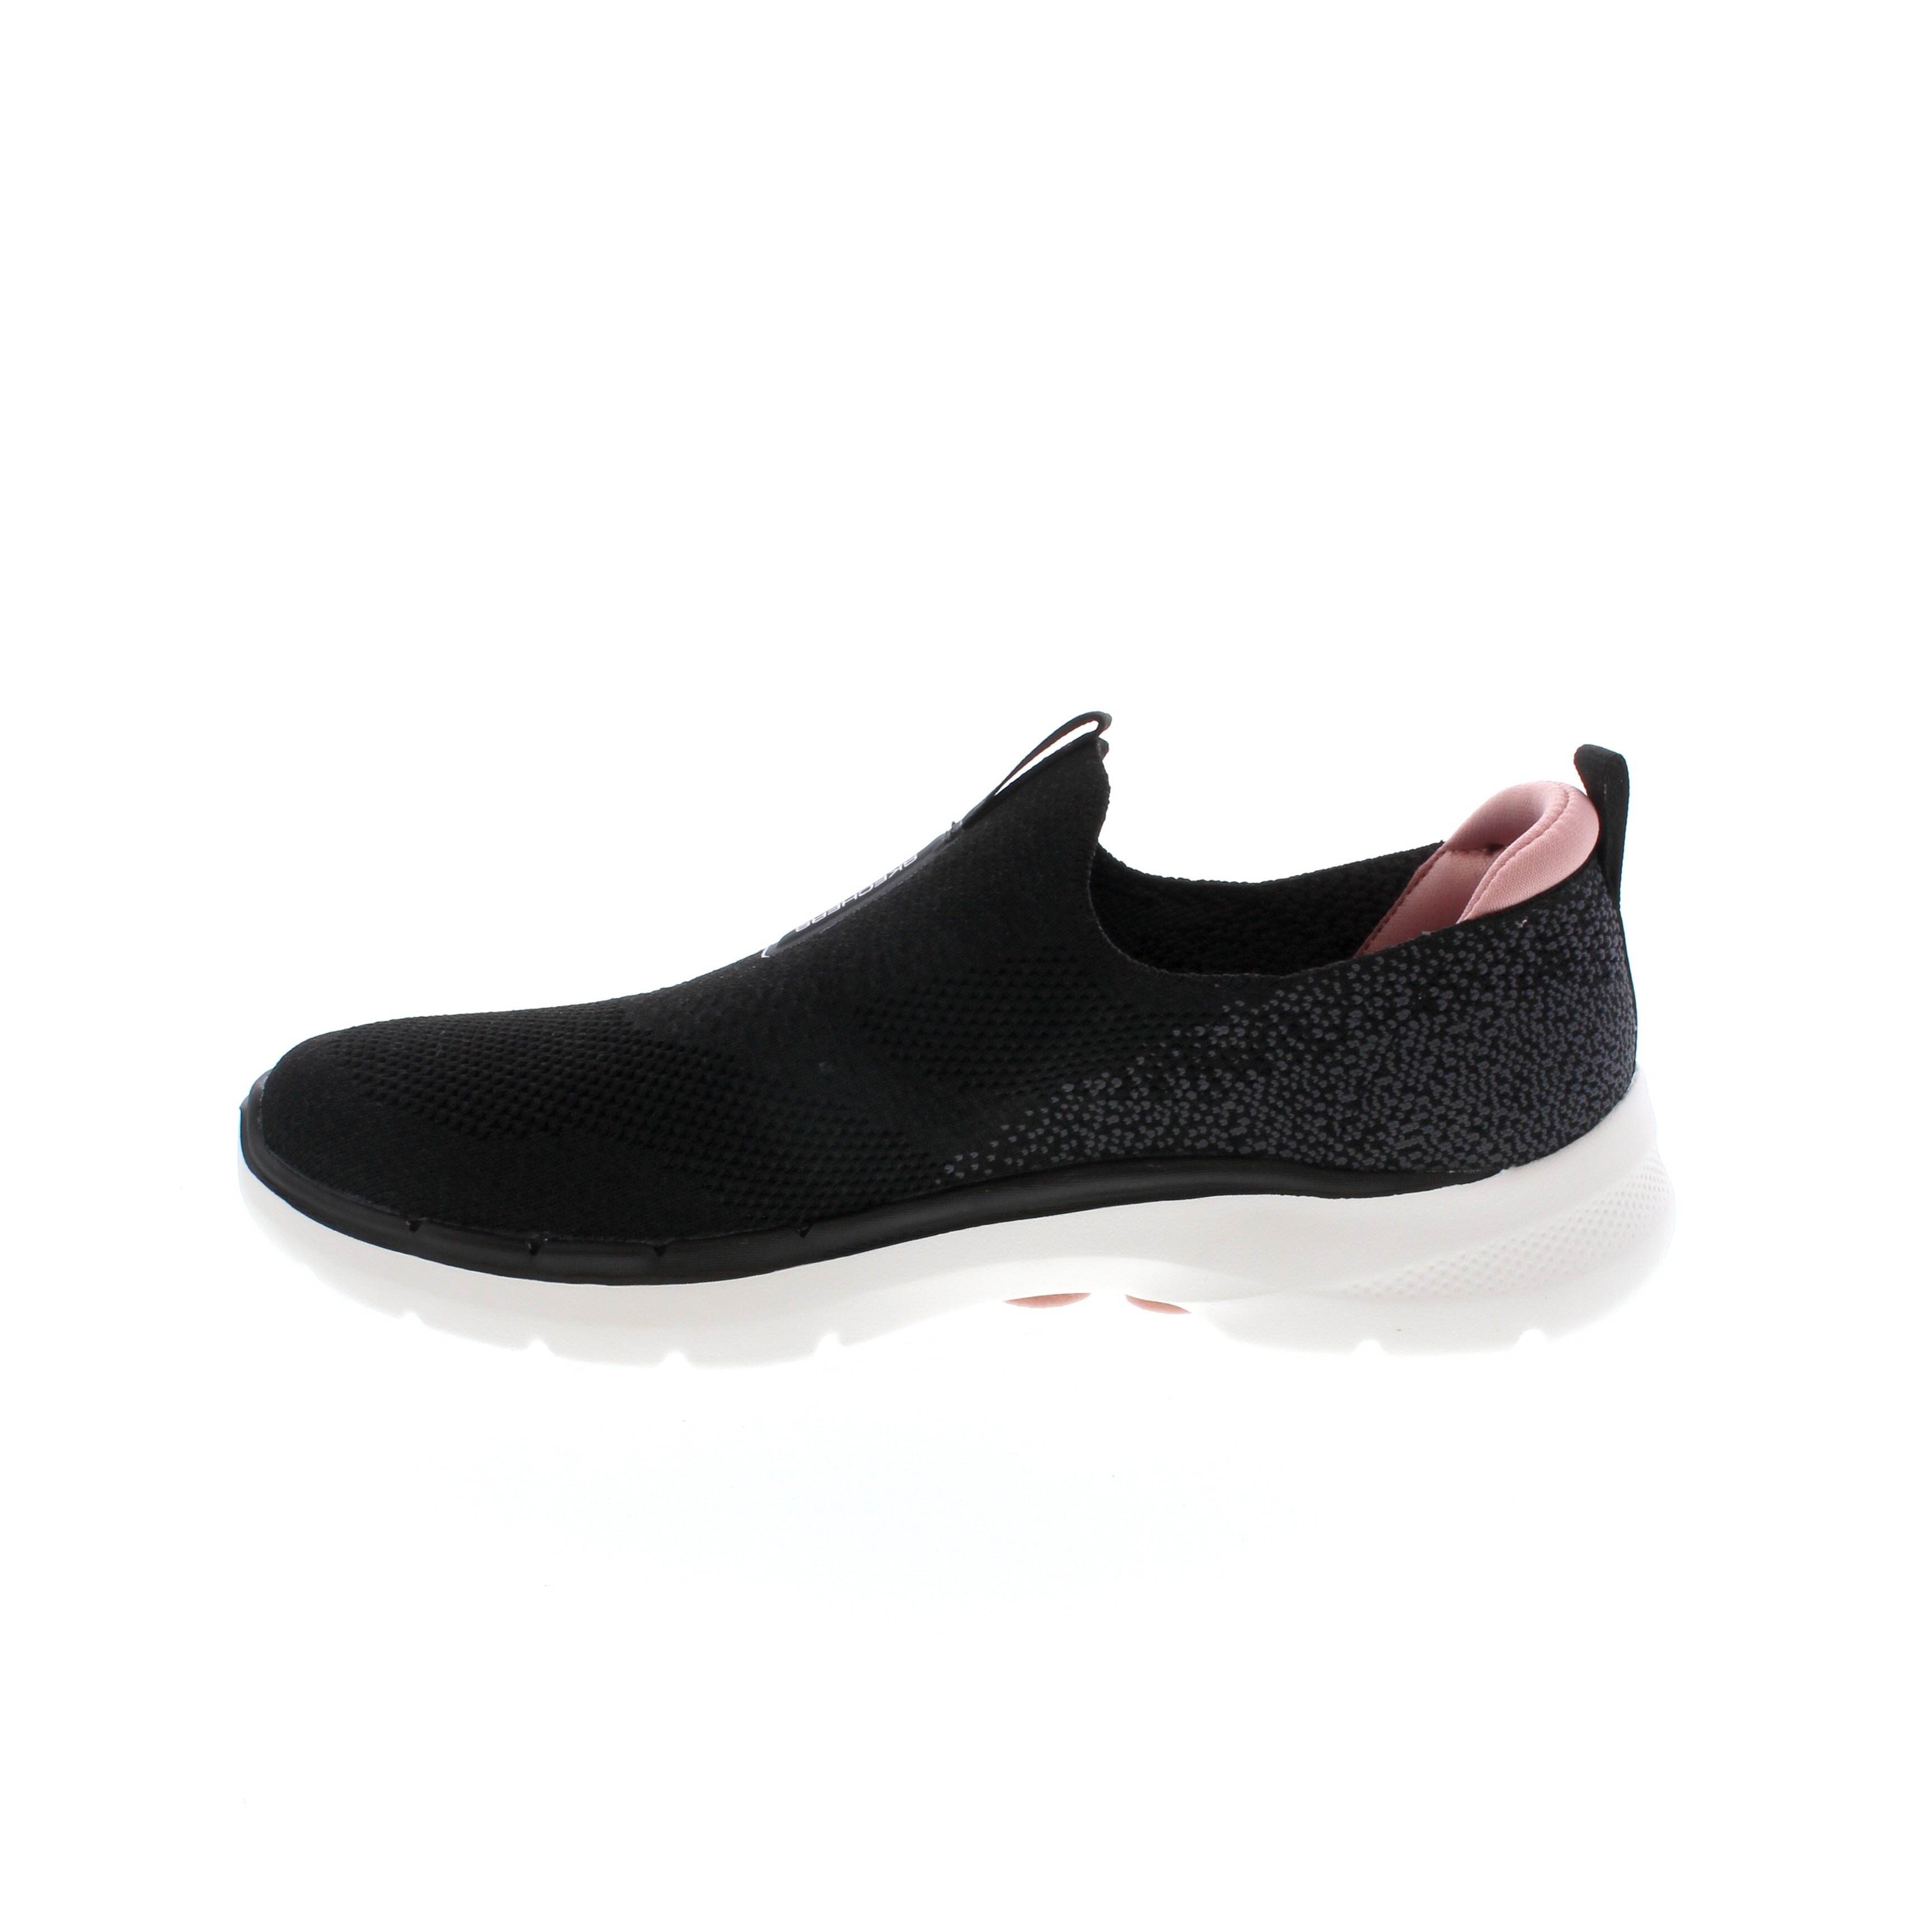 Skechers Black/Pink – City Sole Glimmering Shoes |